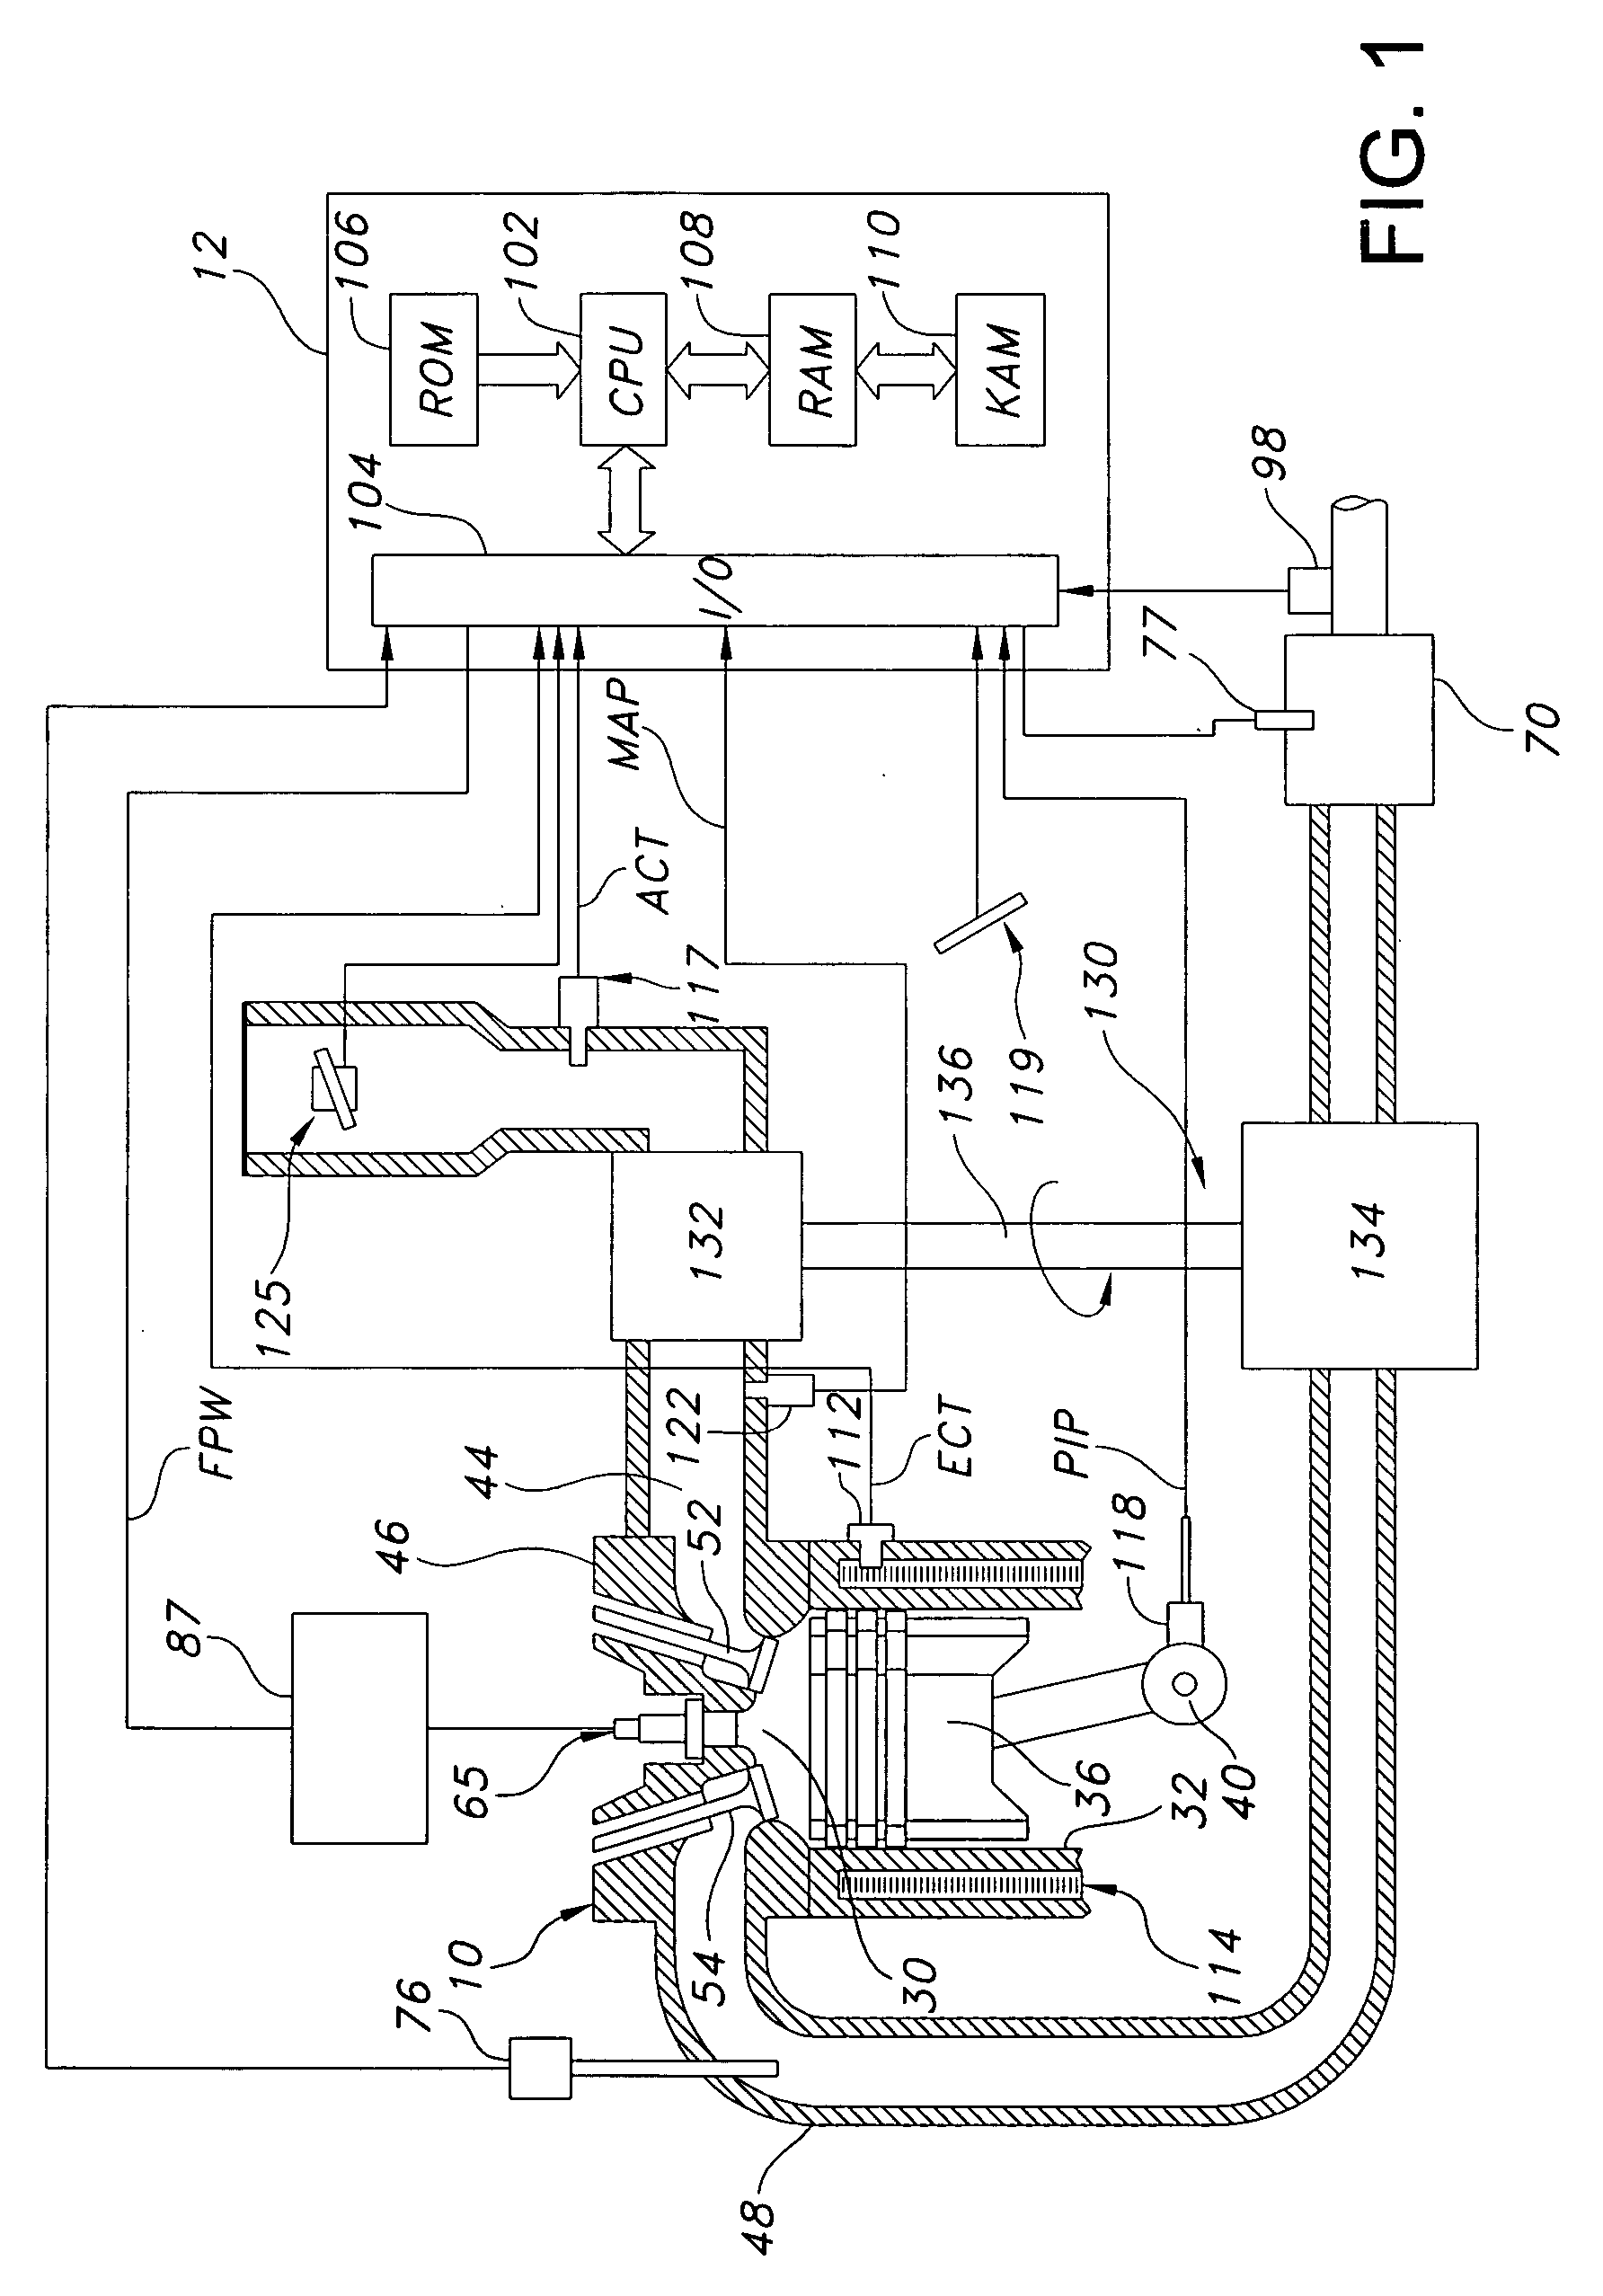 Turbo-lag compensation system having an ejector